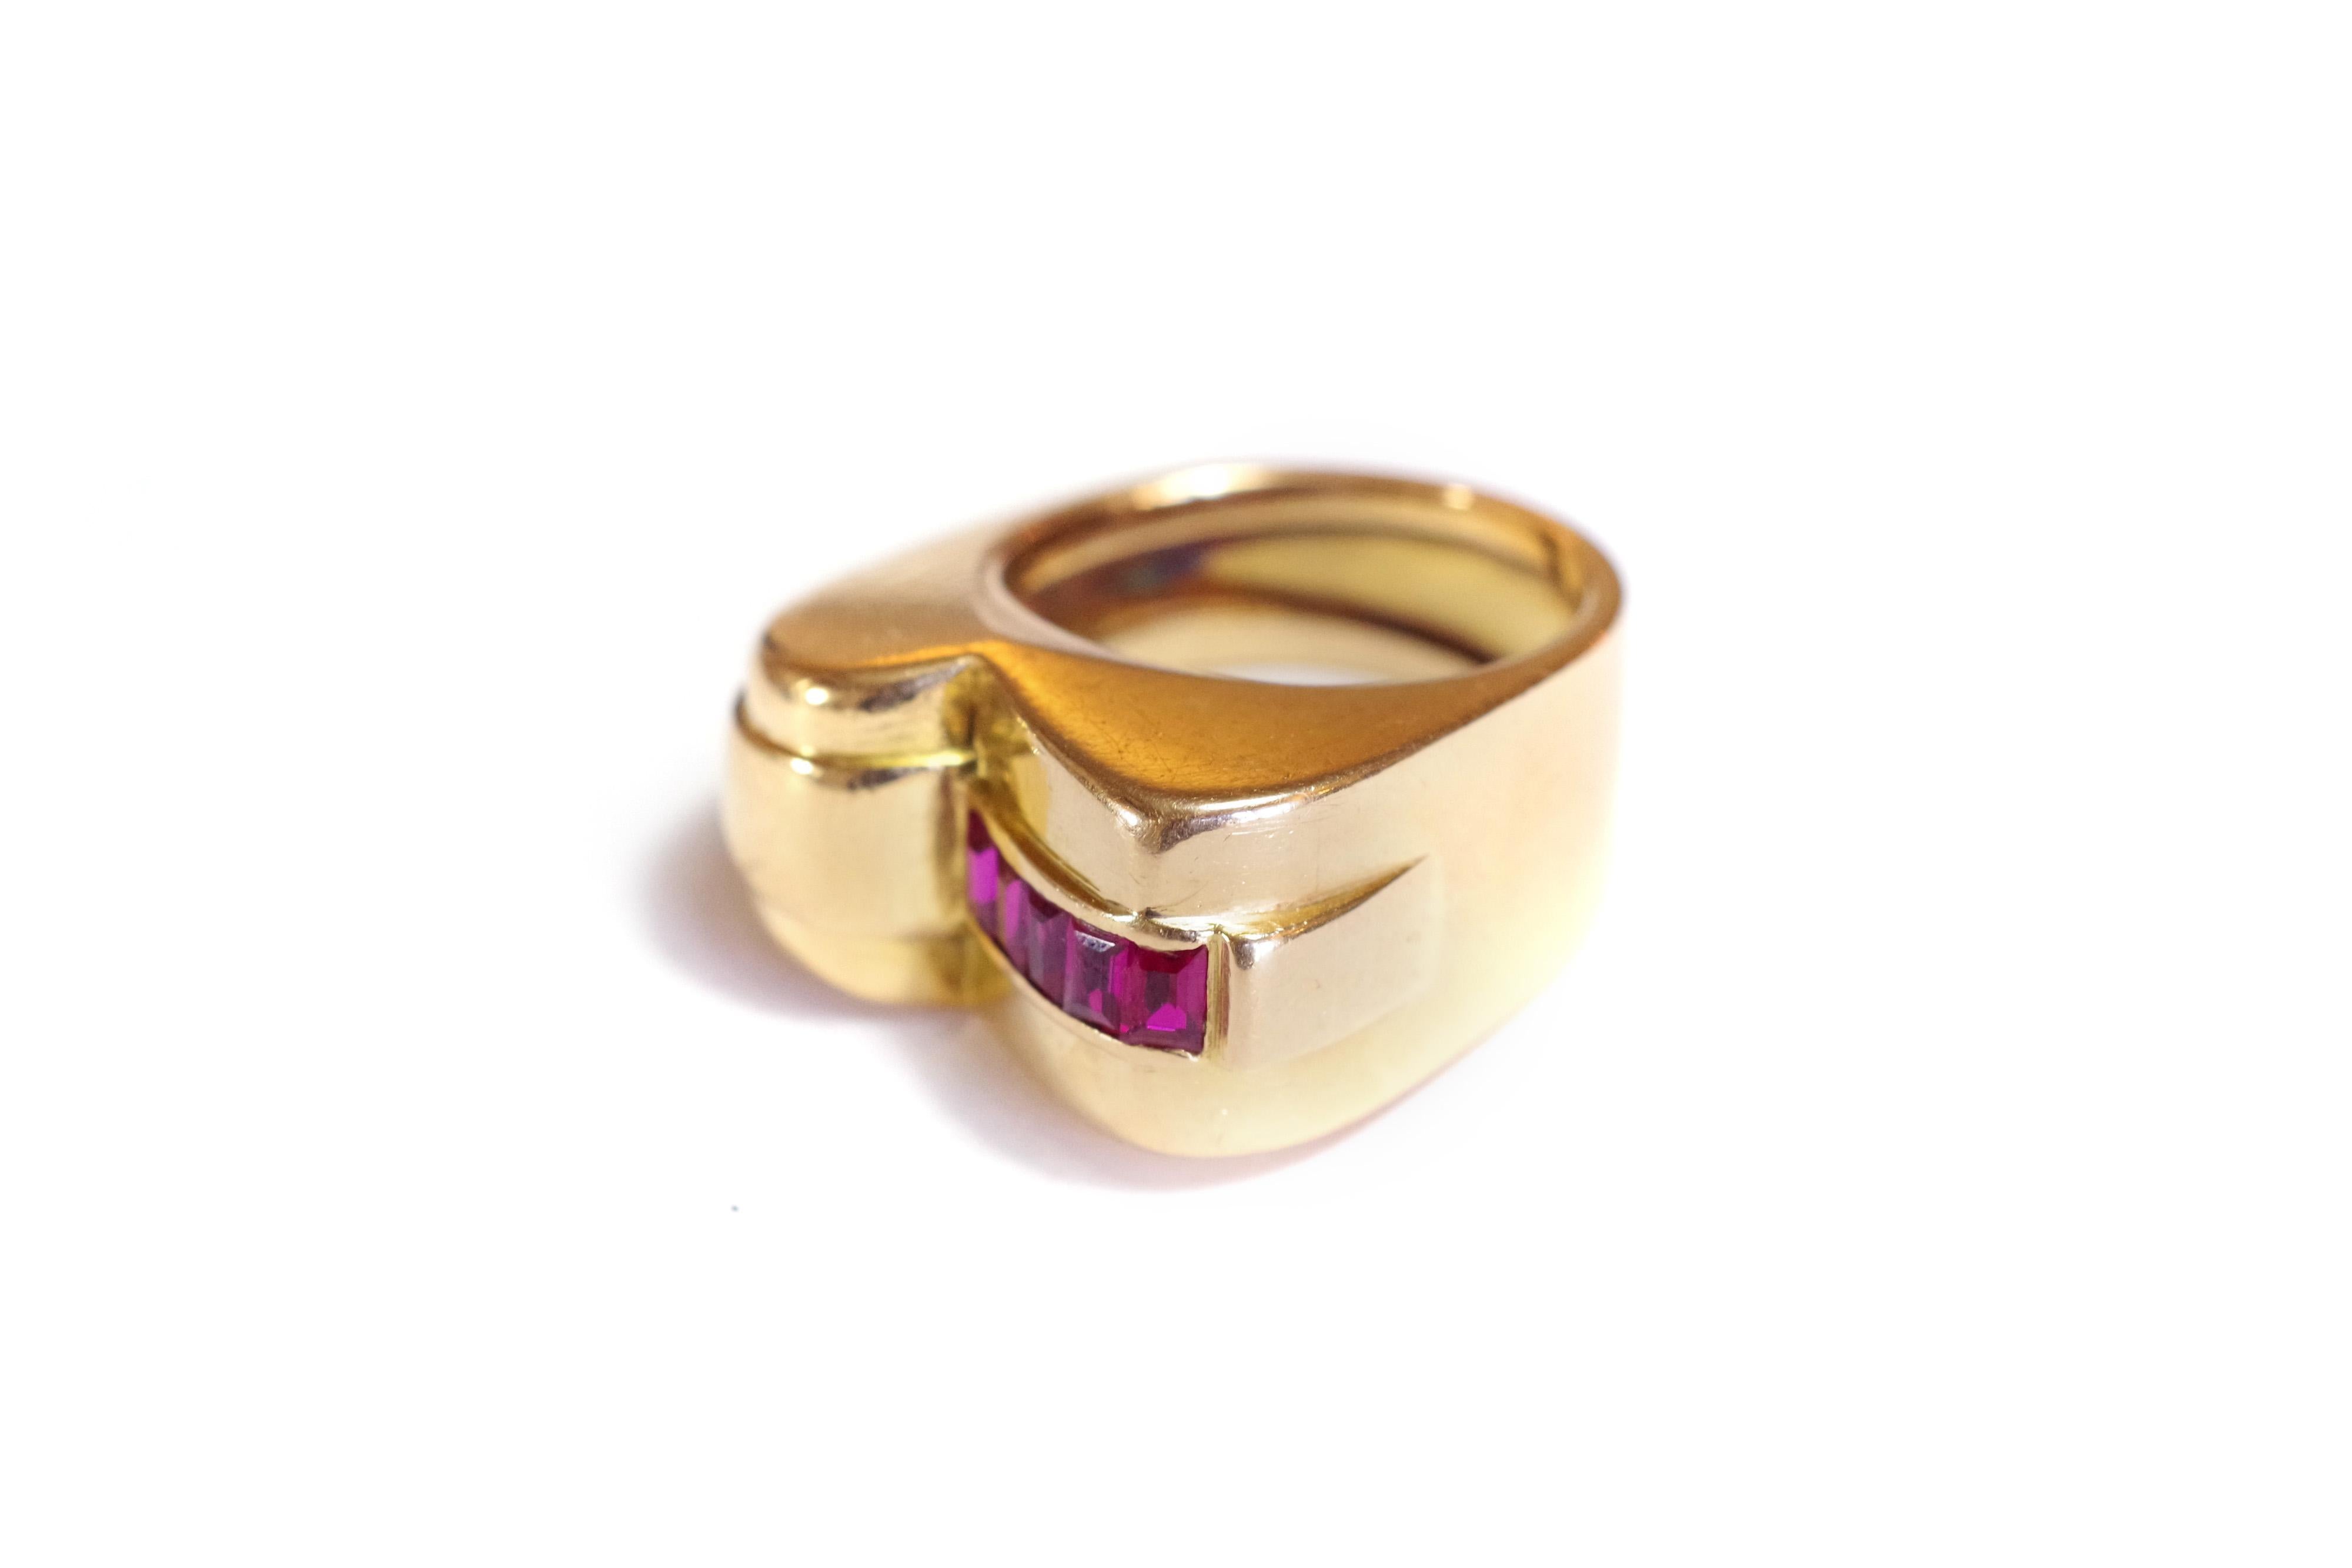 Tank ruby ring in 18k rose gold. The ring is set with a line of five square French Verneuil rubies. The line of rubies is on a flank that meets the center of the ring. A scroll shape opposes the rubies, creating an asymmetry. The shapes and